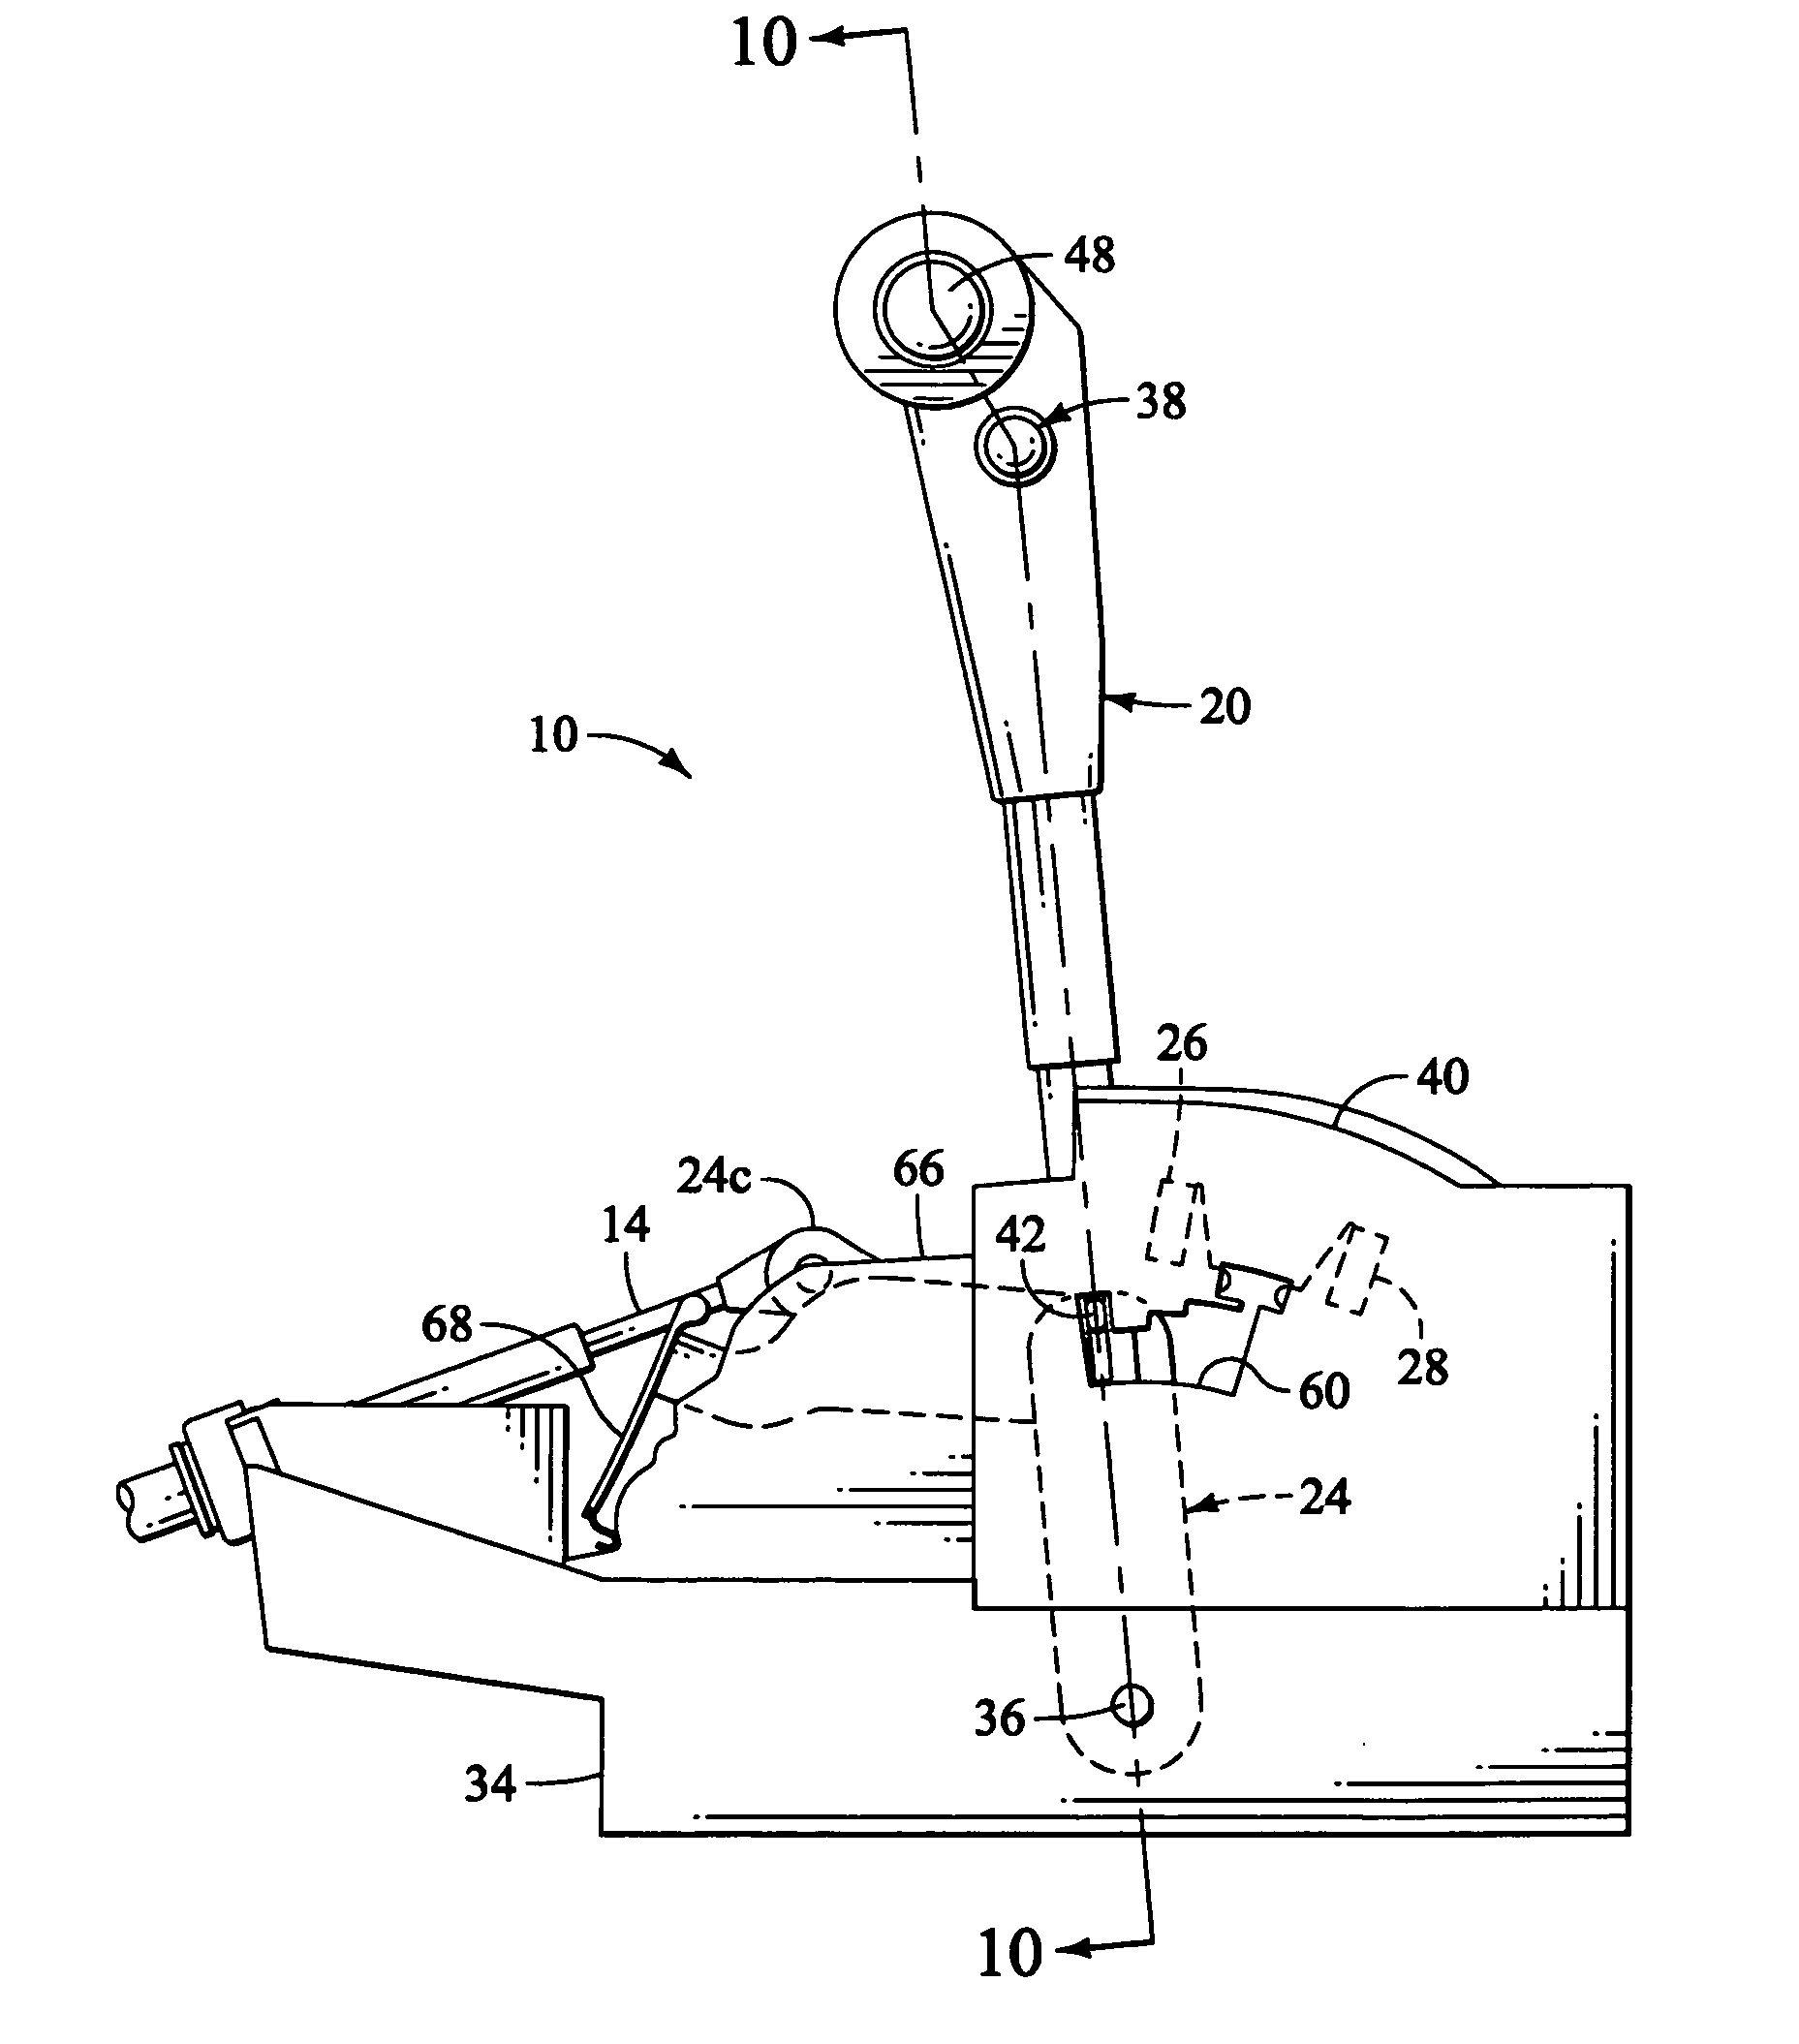 Inline automatic/manual shifter